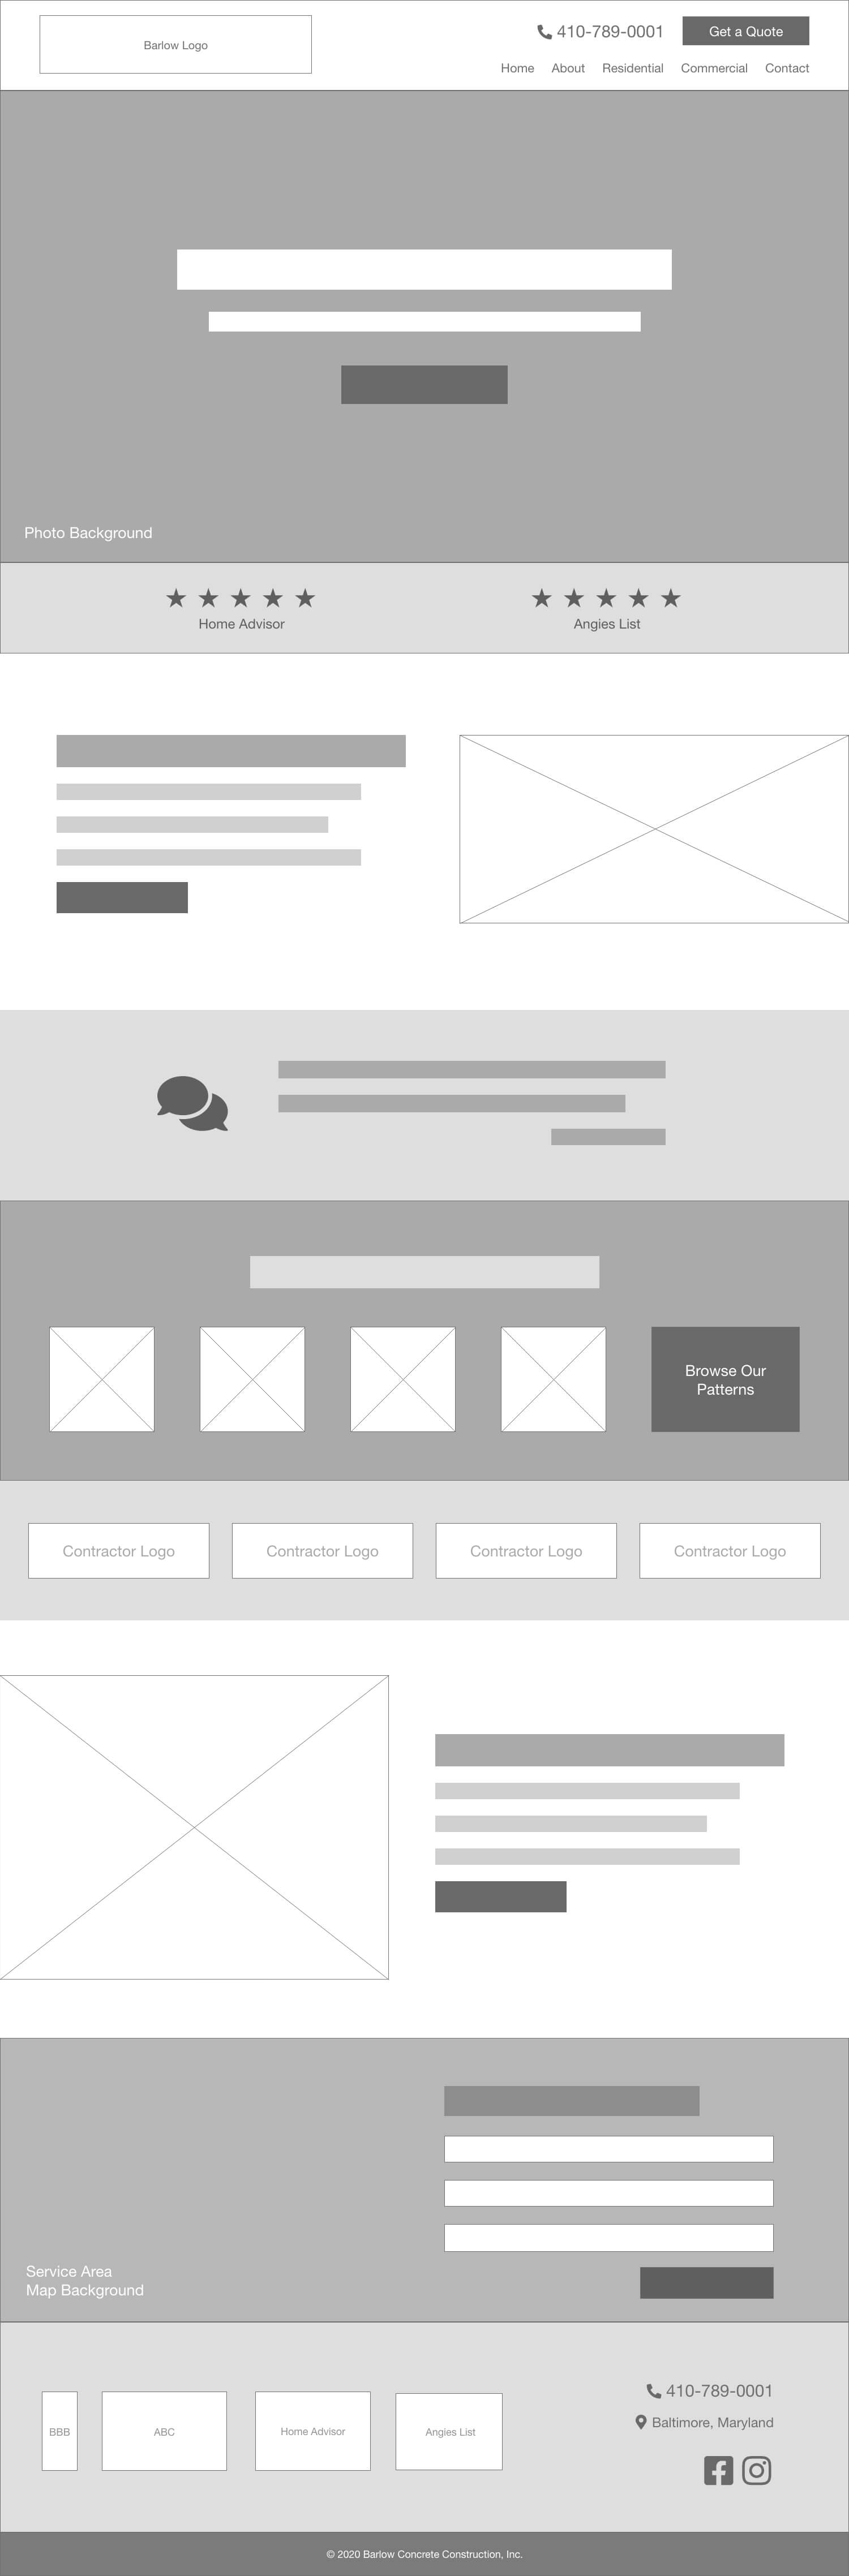 Website Wireframe for Barlow Concrete Construction, Inc.